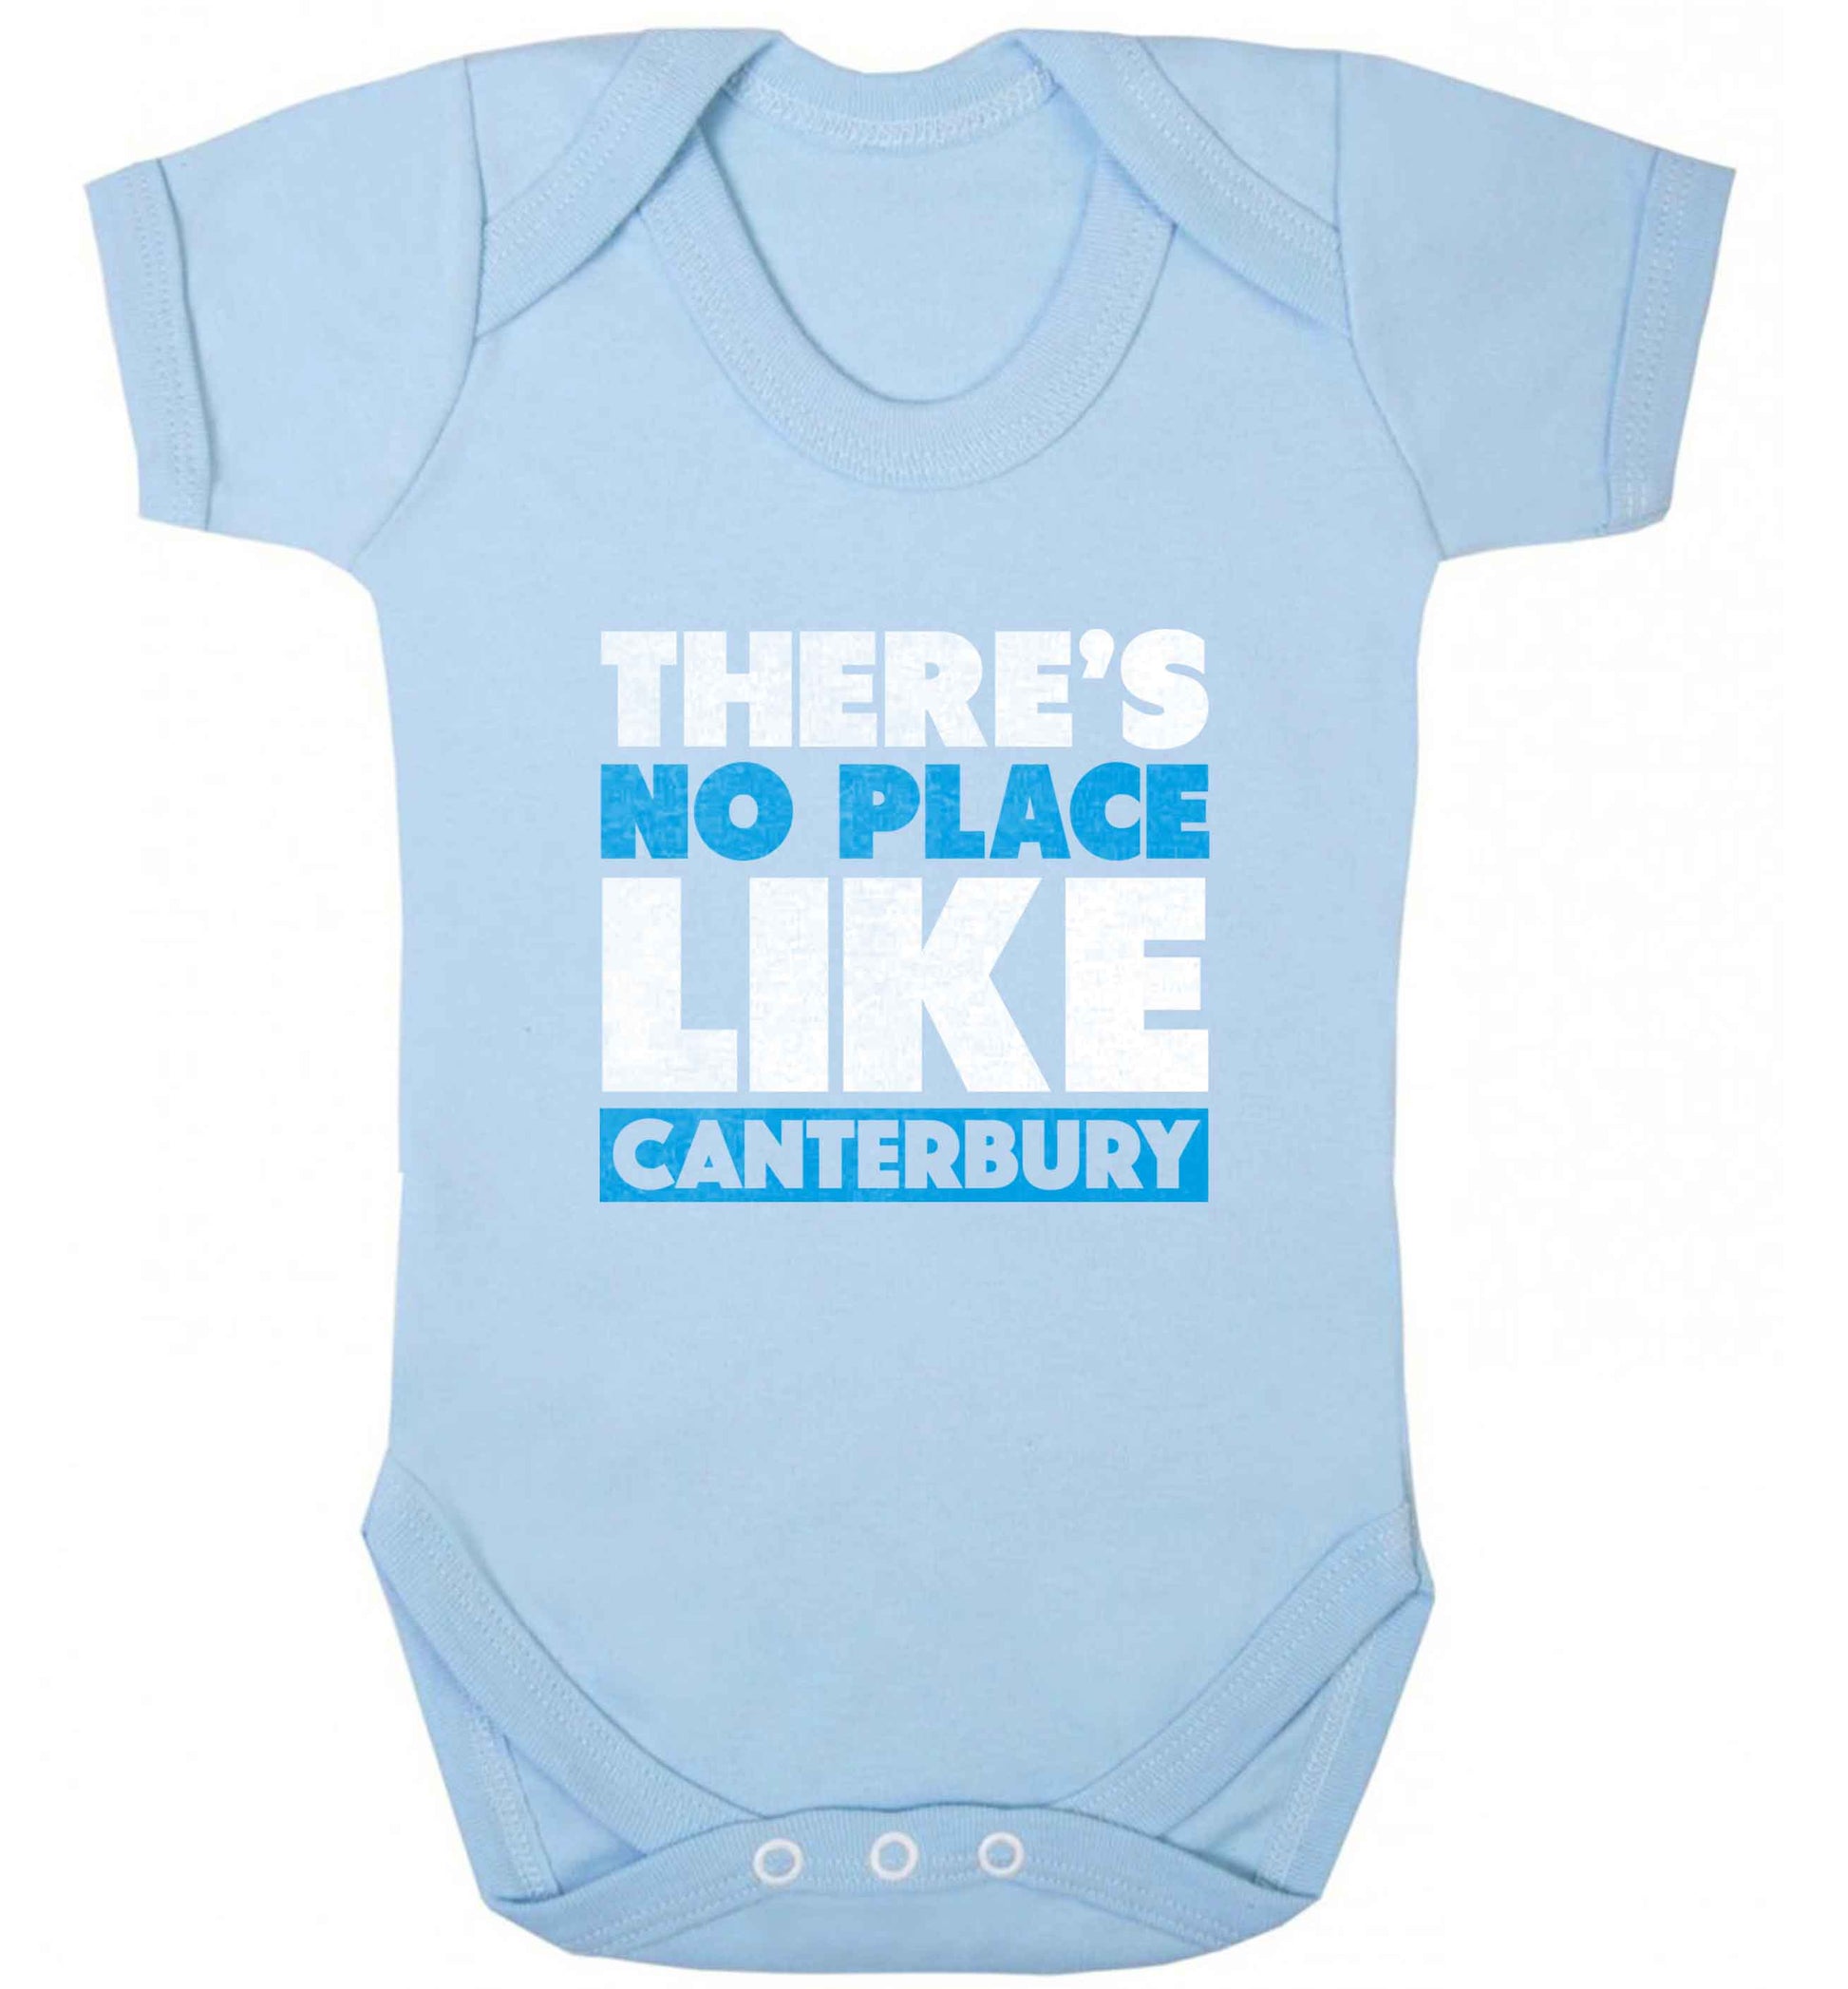 There's no place like Canterbury baby vest pale blue 18-24 months